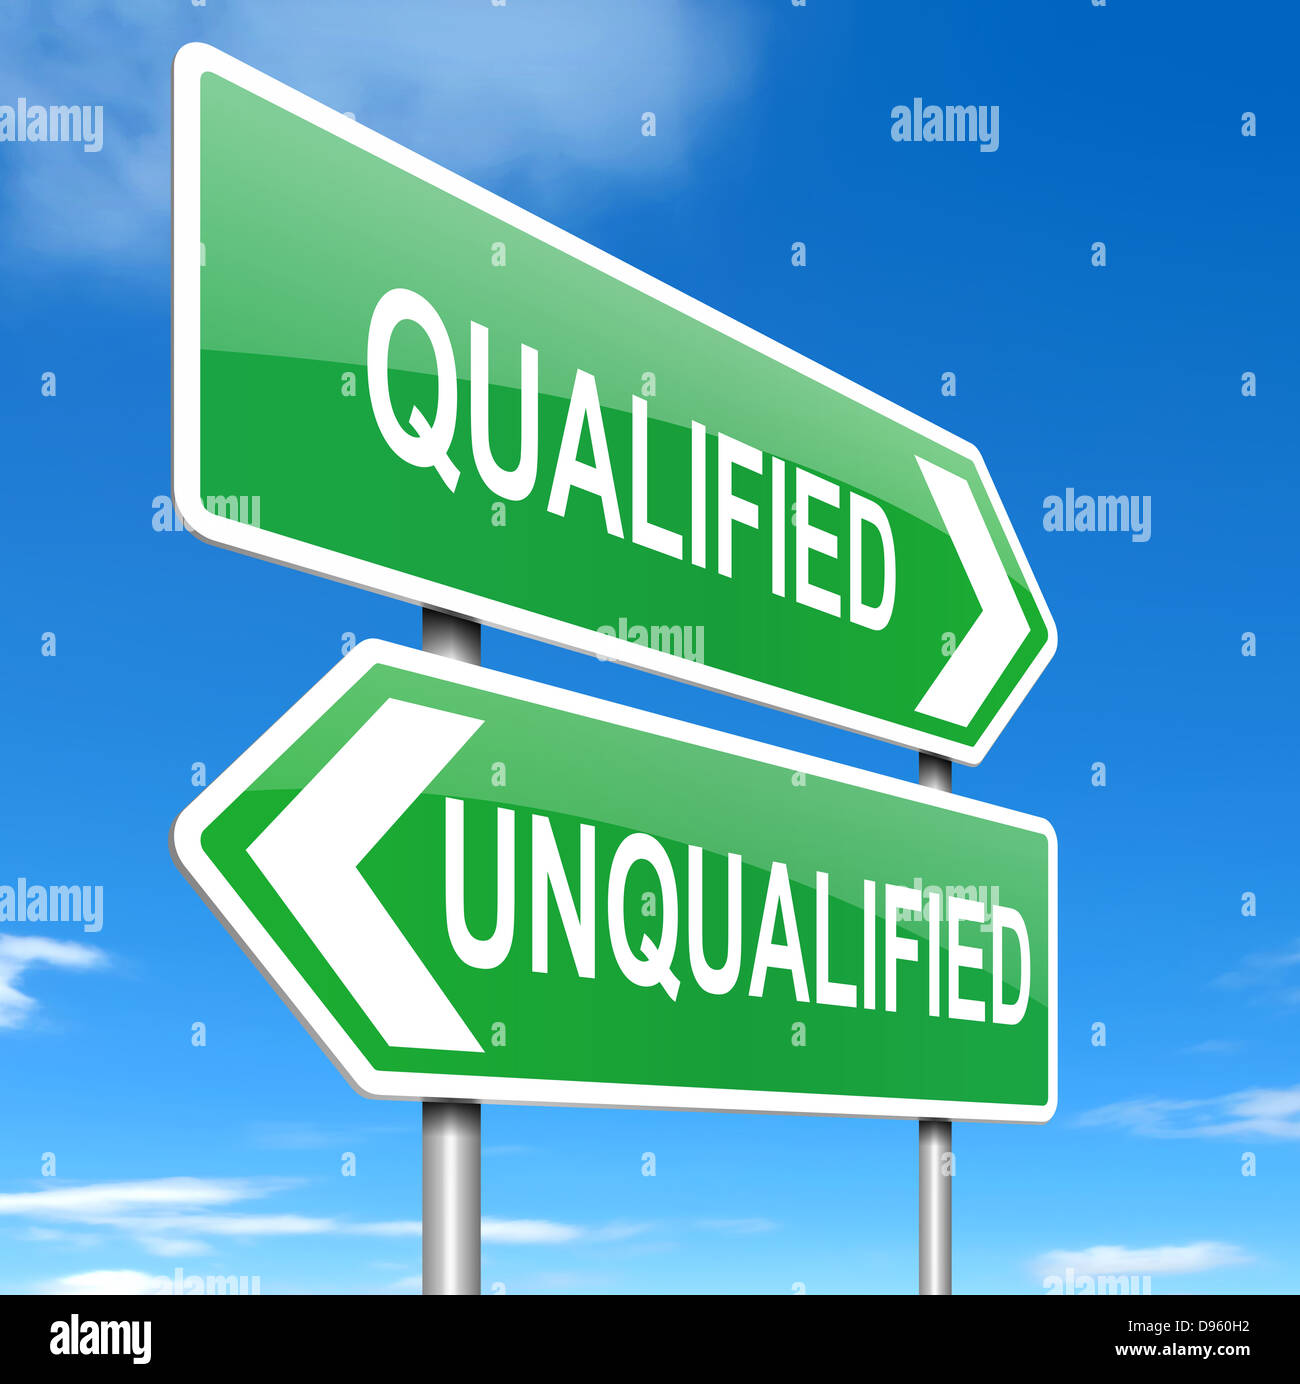 Qualified or not. Stock Photo